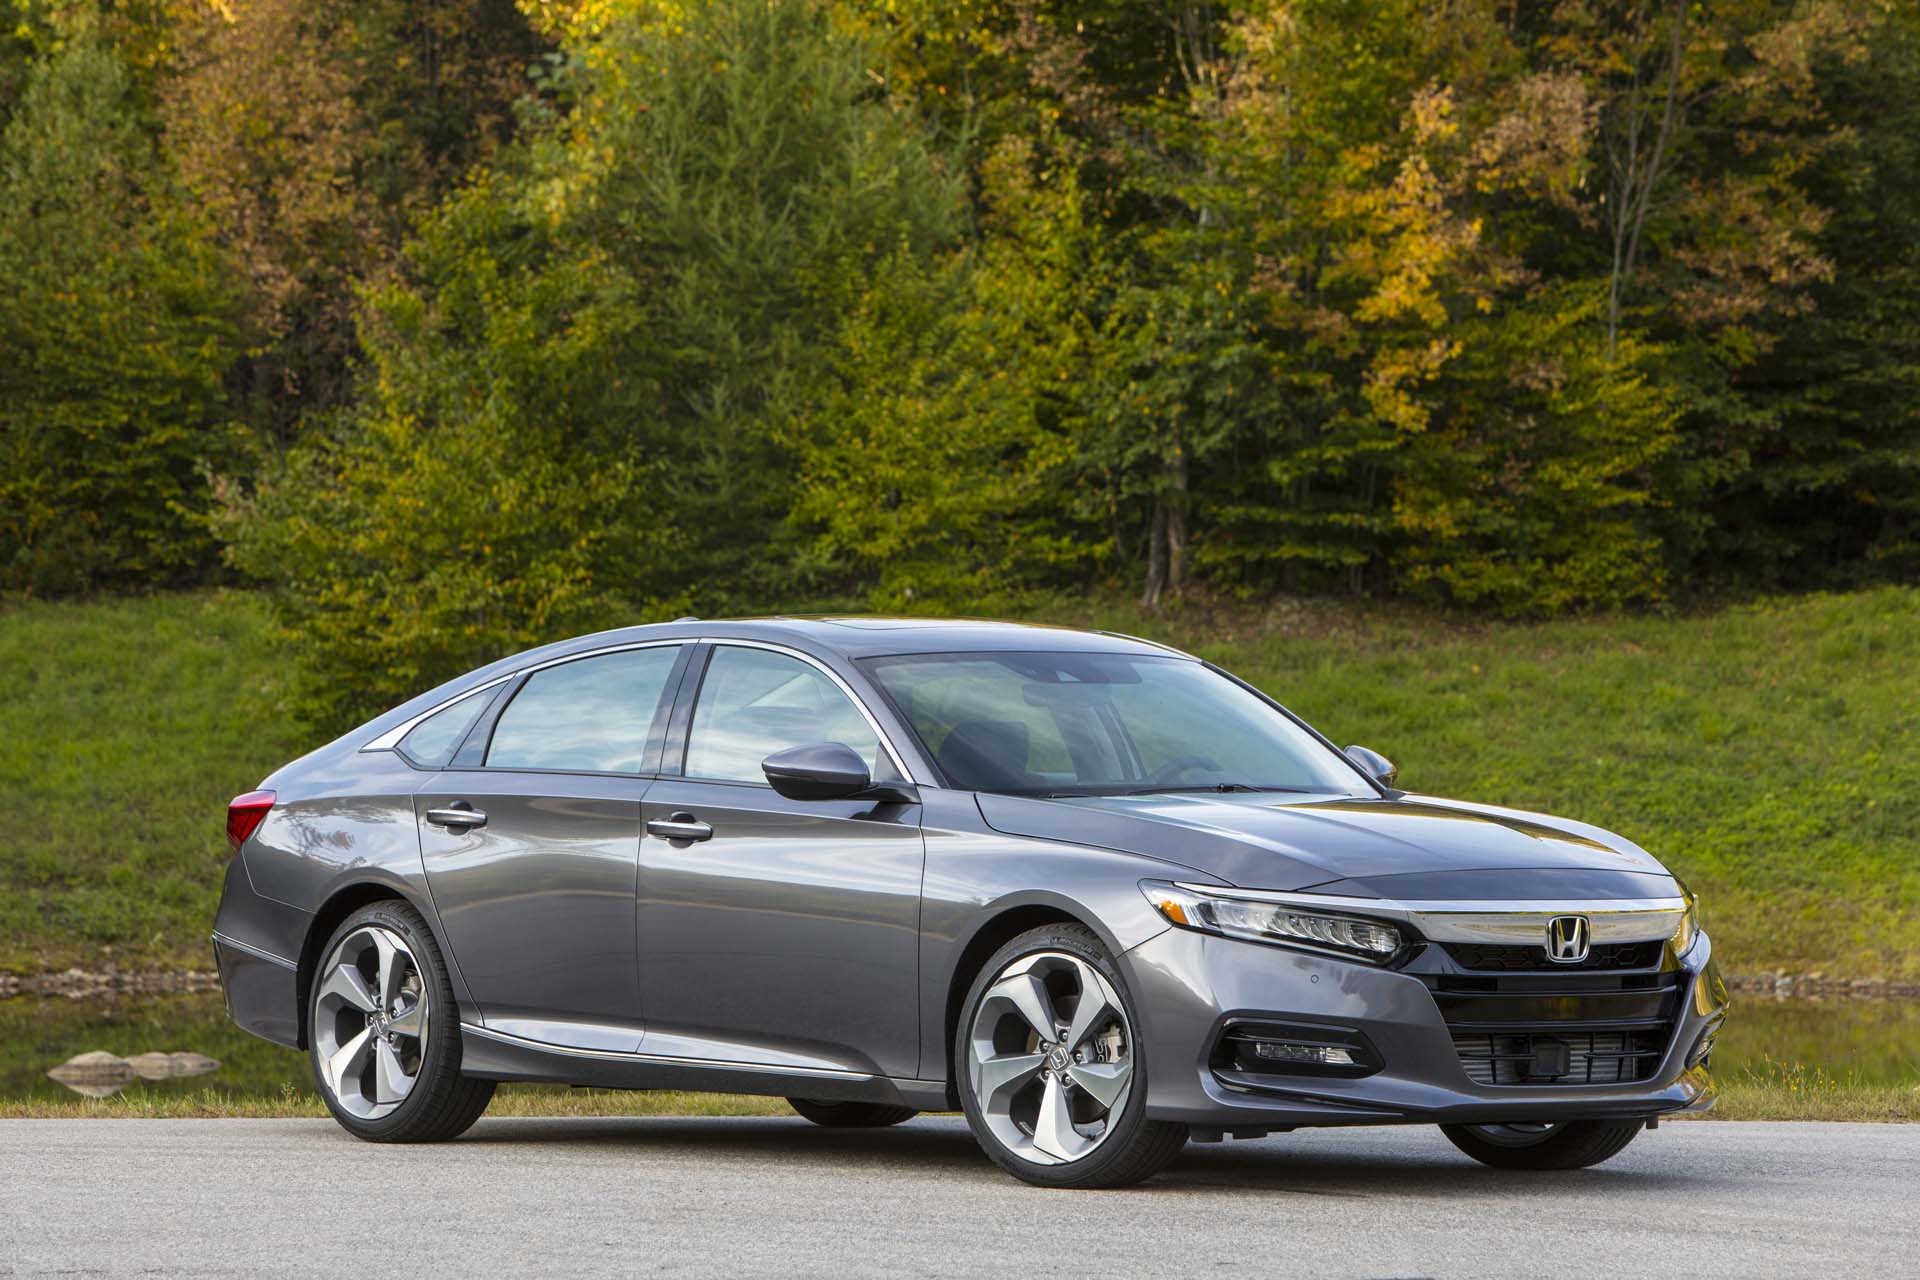 2019 Honda Accord lineup consolidated, price hiked to $24,615